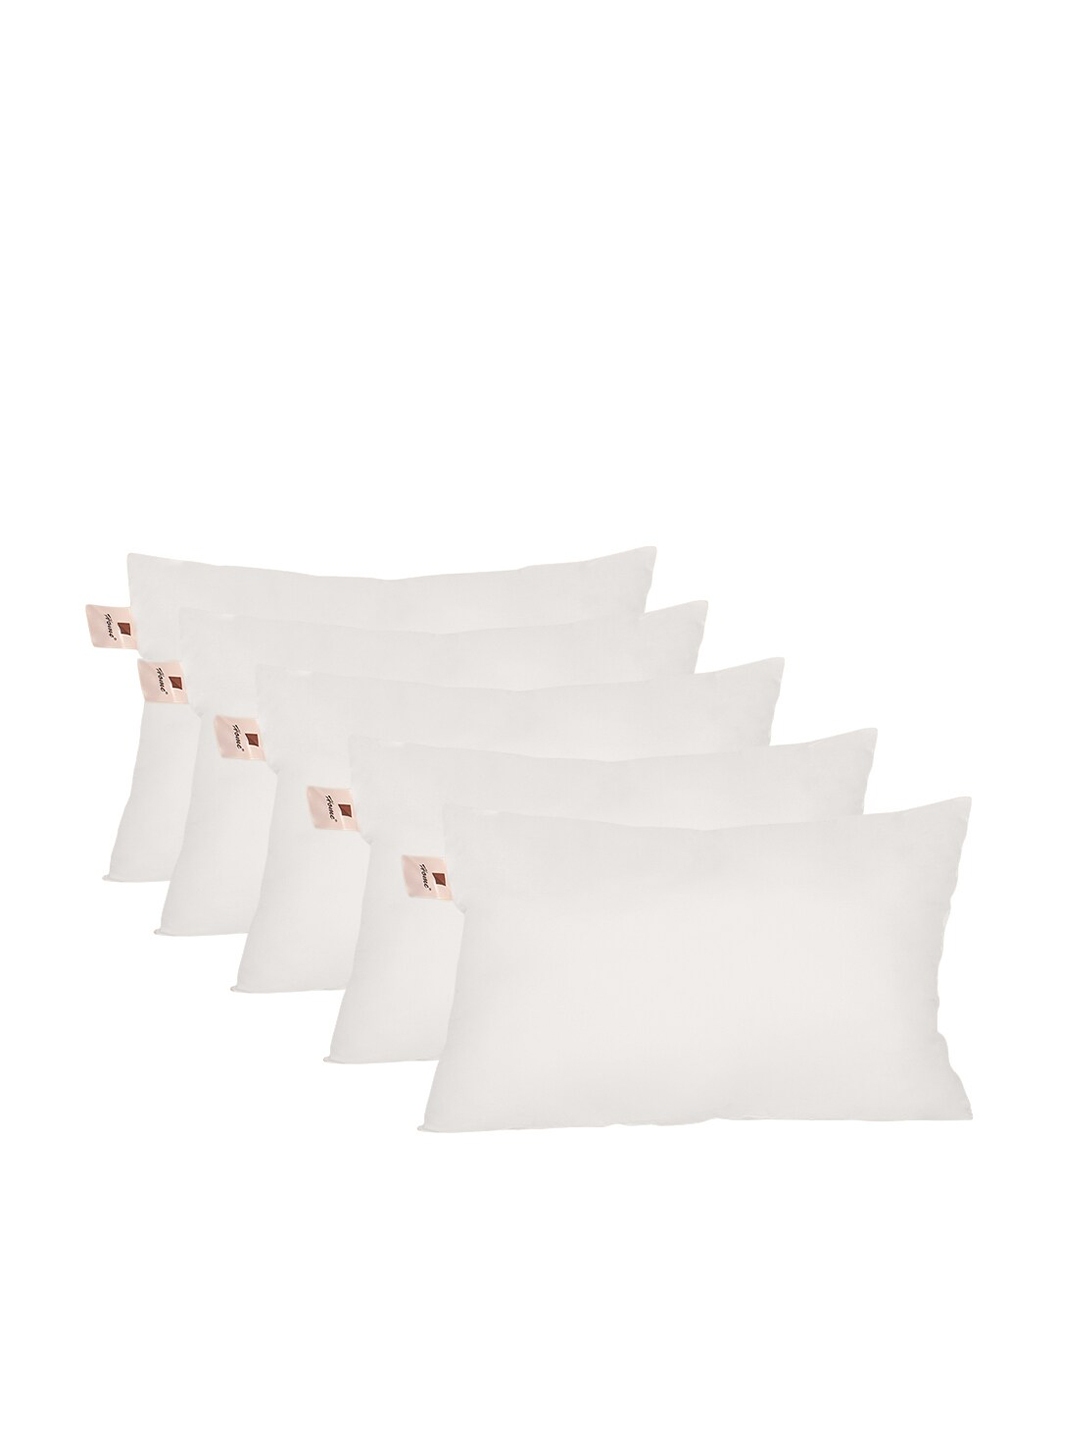 Buy Home Pack Of 5 White Solid Micro Cushion Pillows -  - Home for Unisex